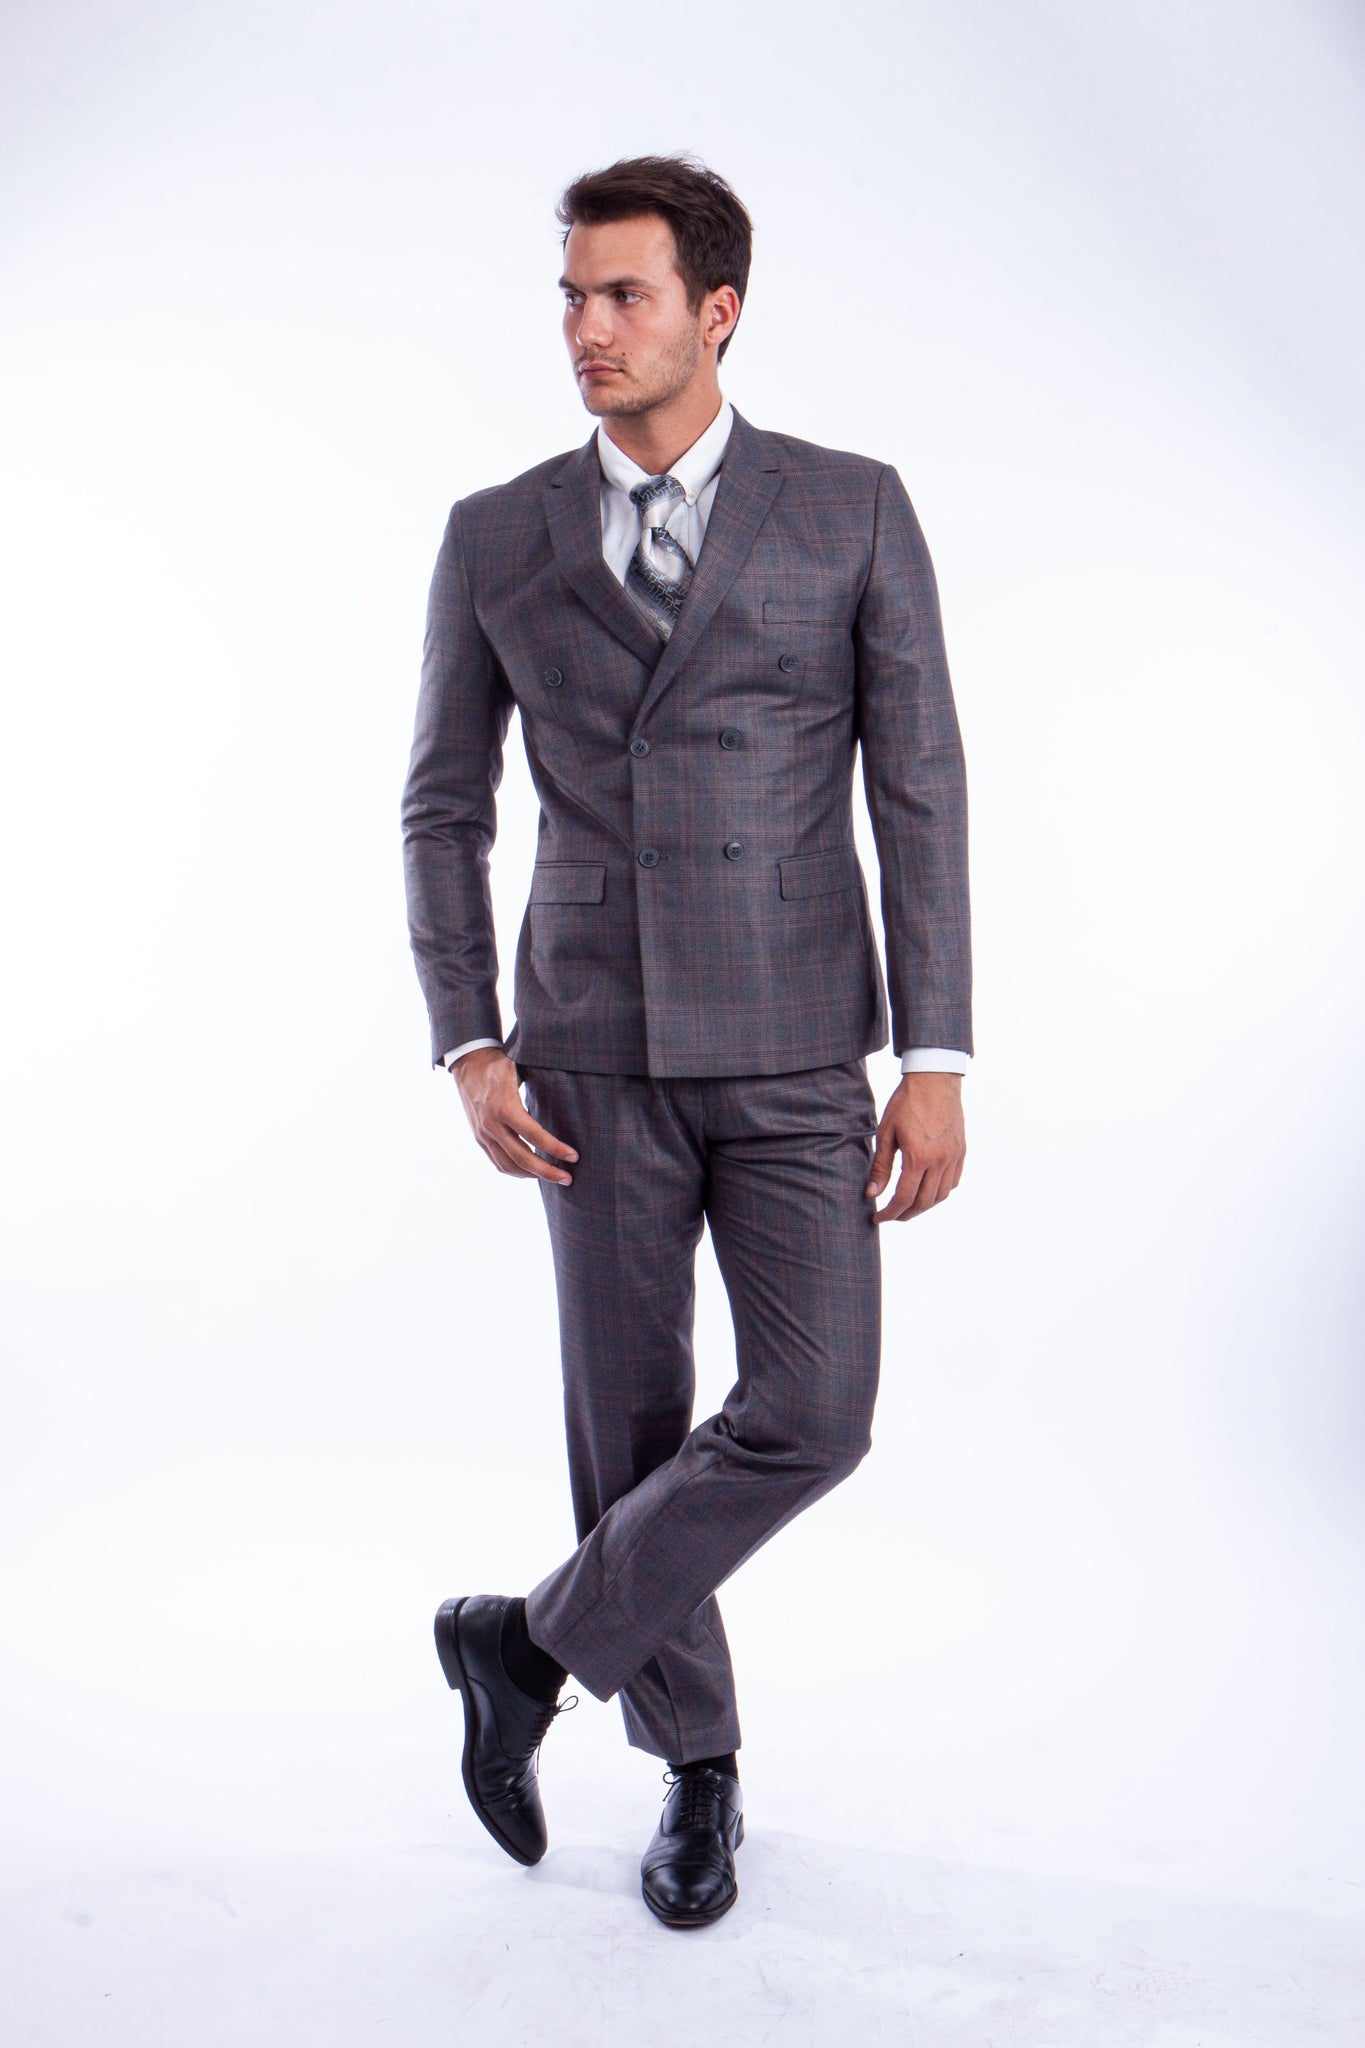 Dk.Gray Suit For Men Formal Suits For All Ocassions